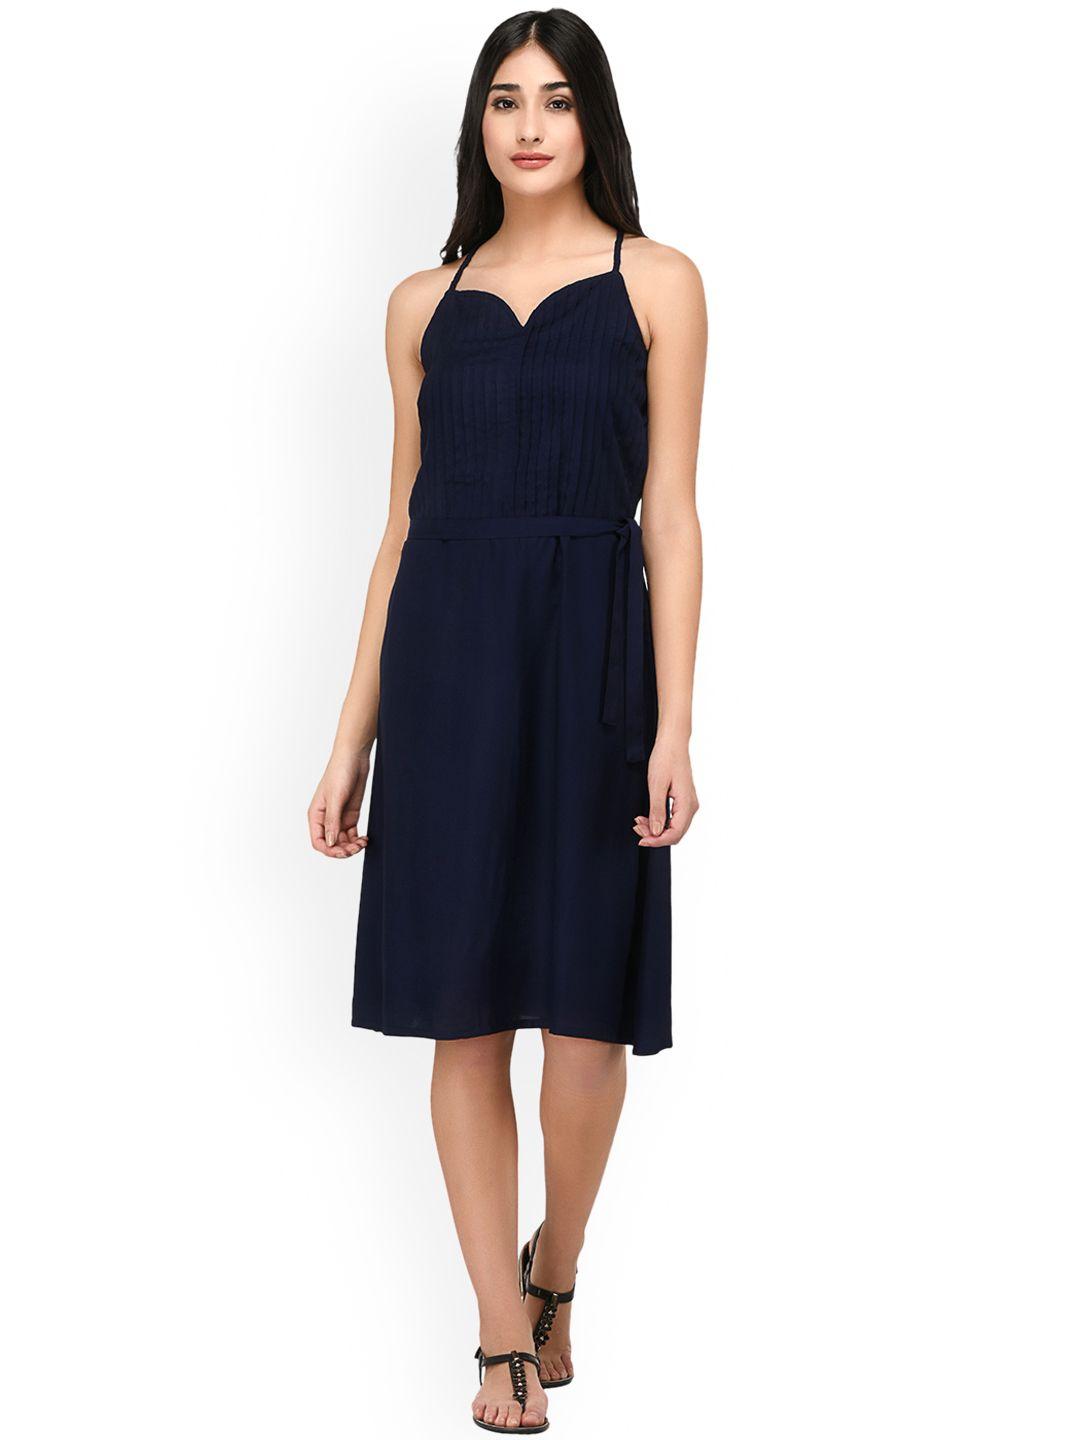 purys-women-navy-blue-solid-fit-and-flare-dress